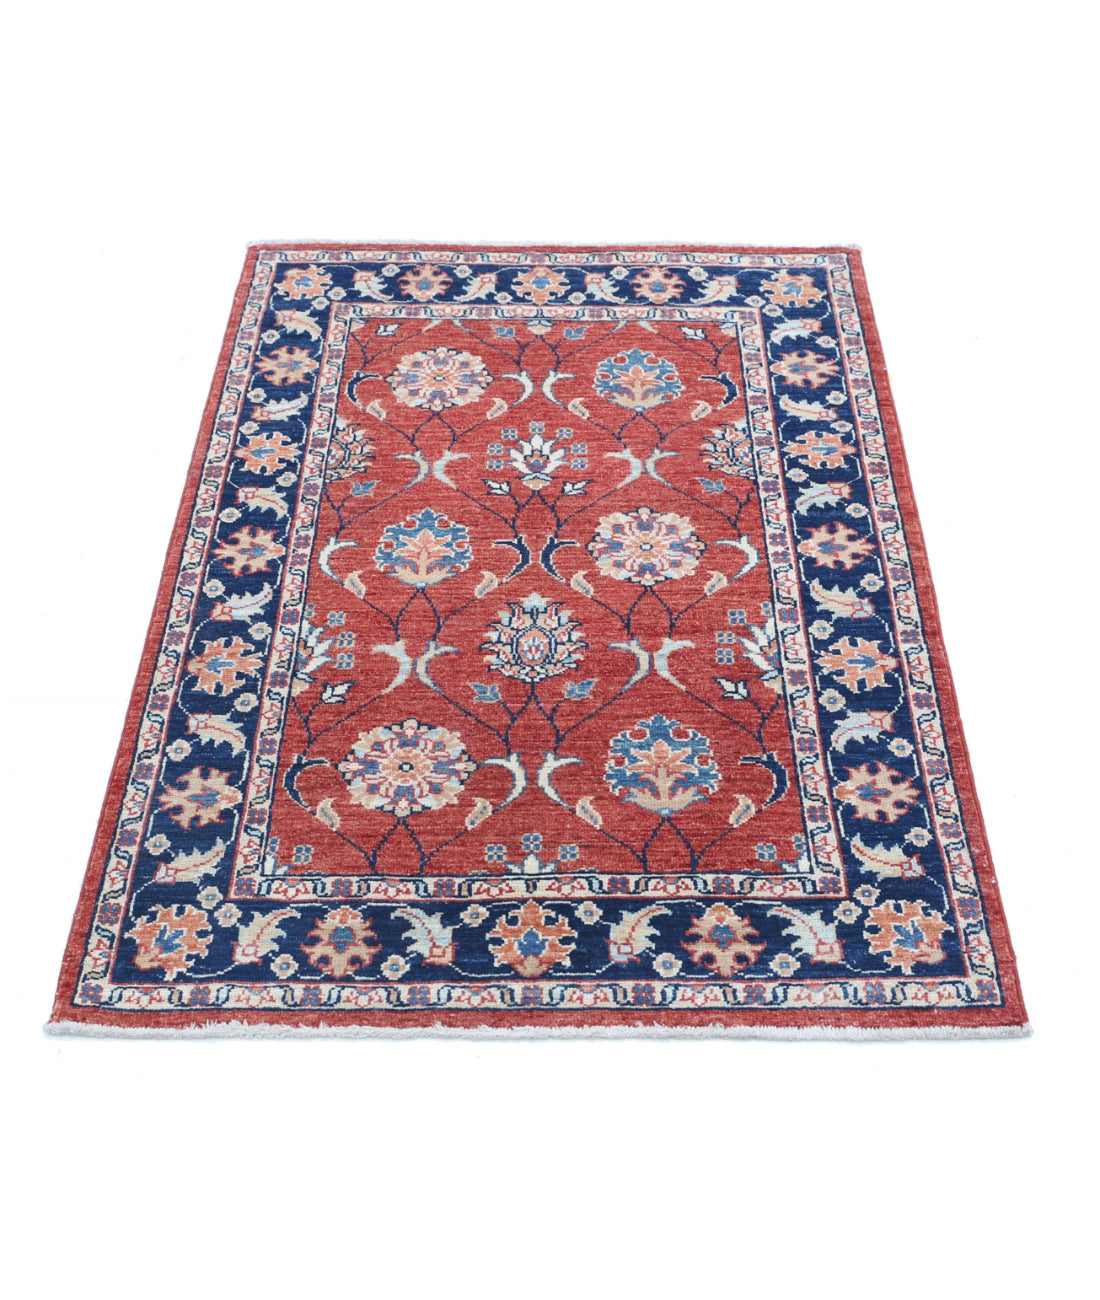 Ziegler 2'9'' X 4'2'' Hand-Knotted Wool Rug 2'9'' x 4'2'' (83 X 125) / Red / Blue